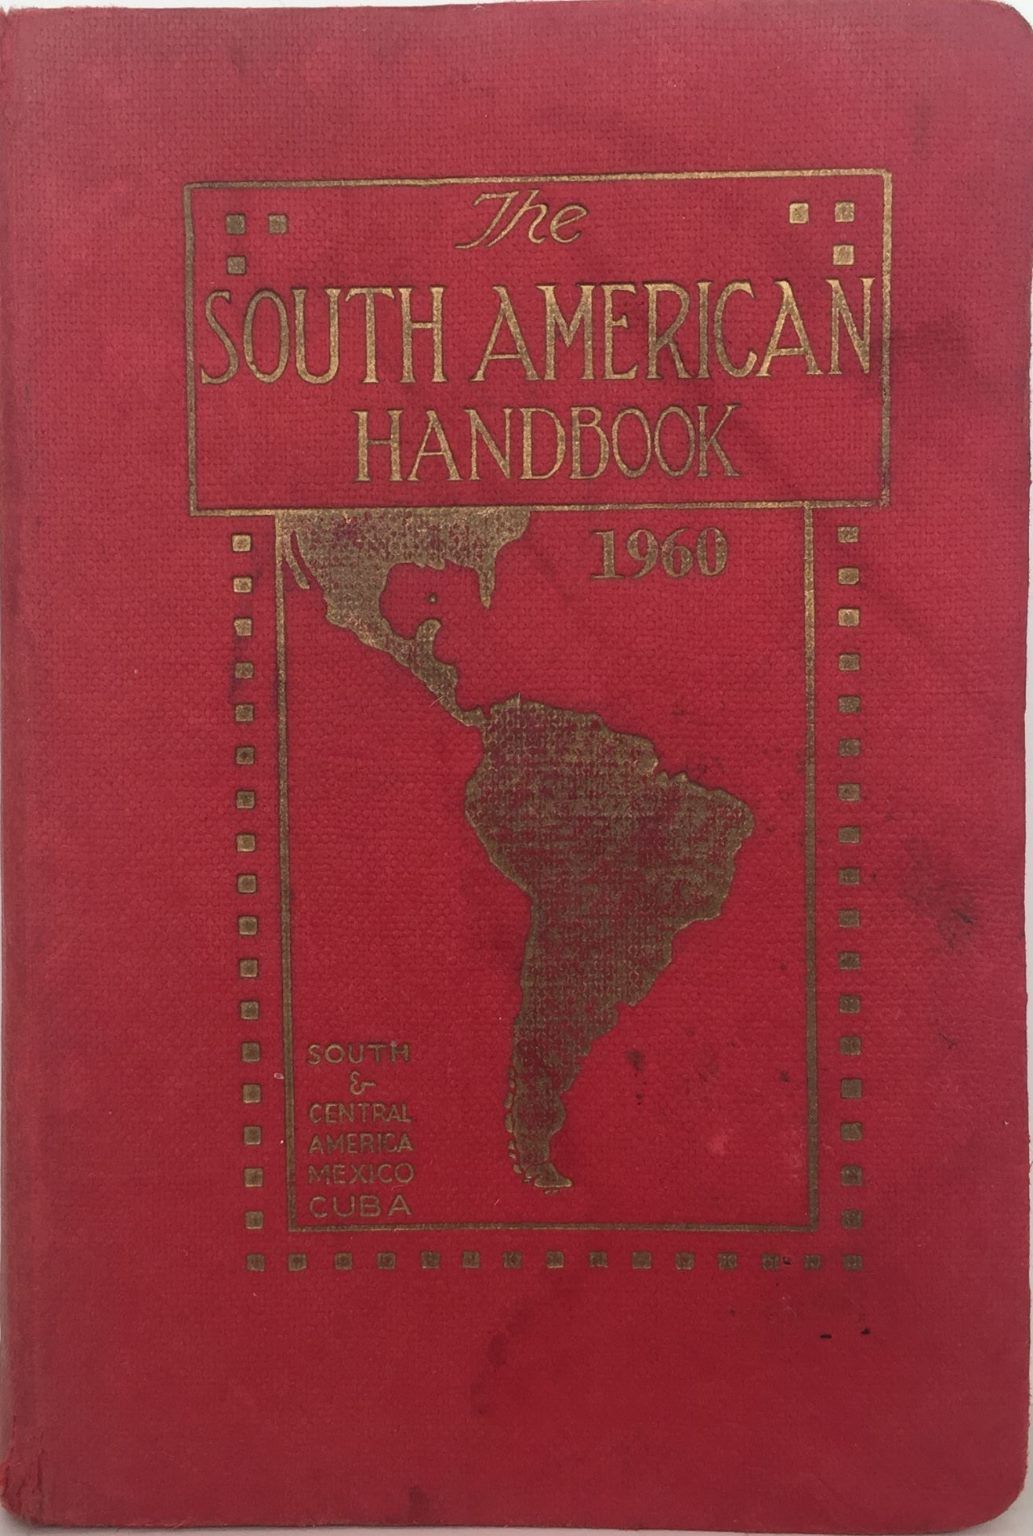 THE SOUTH AMERICAN HANDBOOK 1960 - South and Central America, Mexico and Cuba